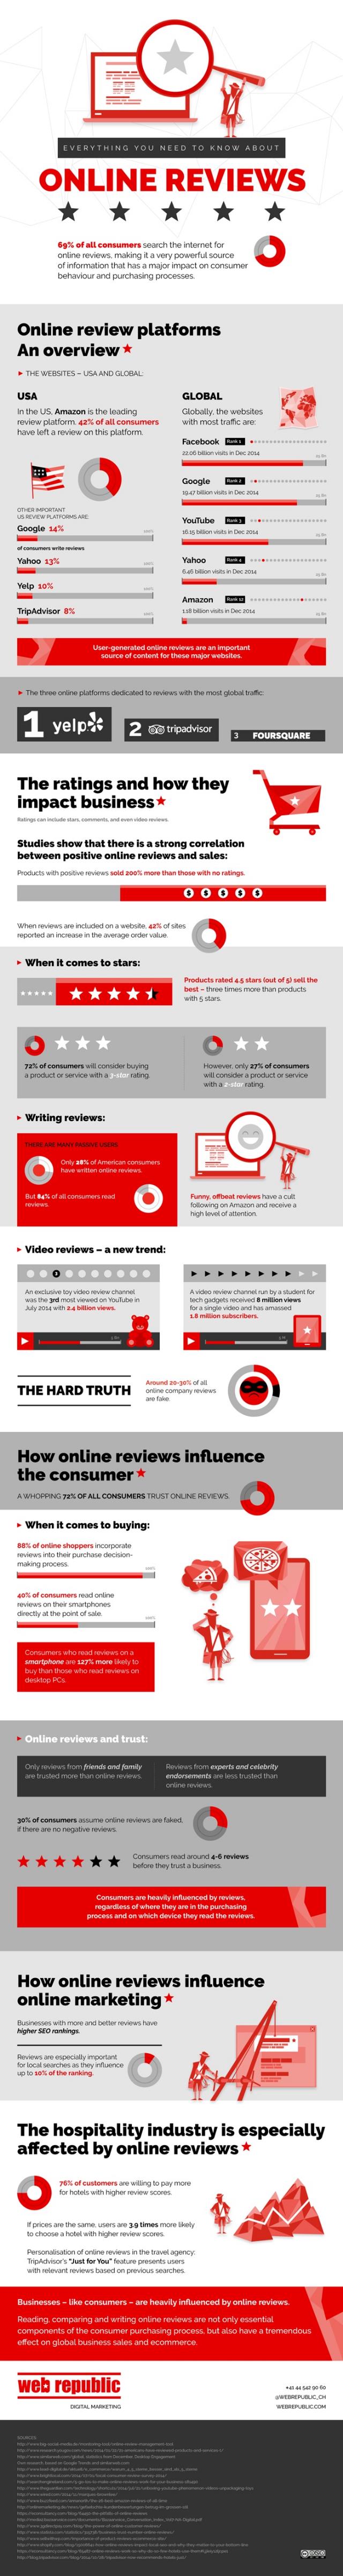 Online Reviews infographic